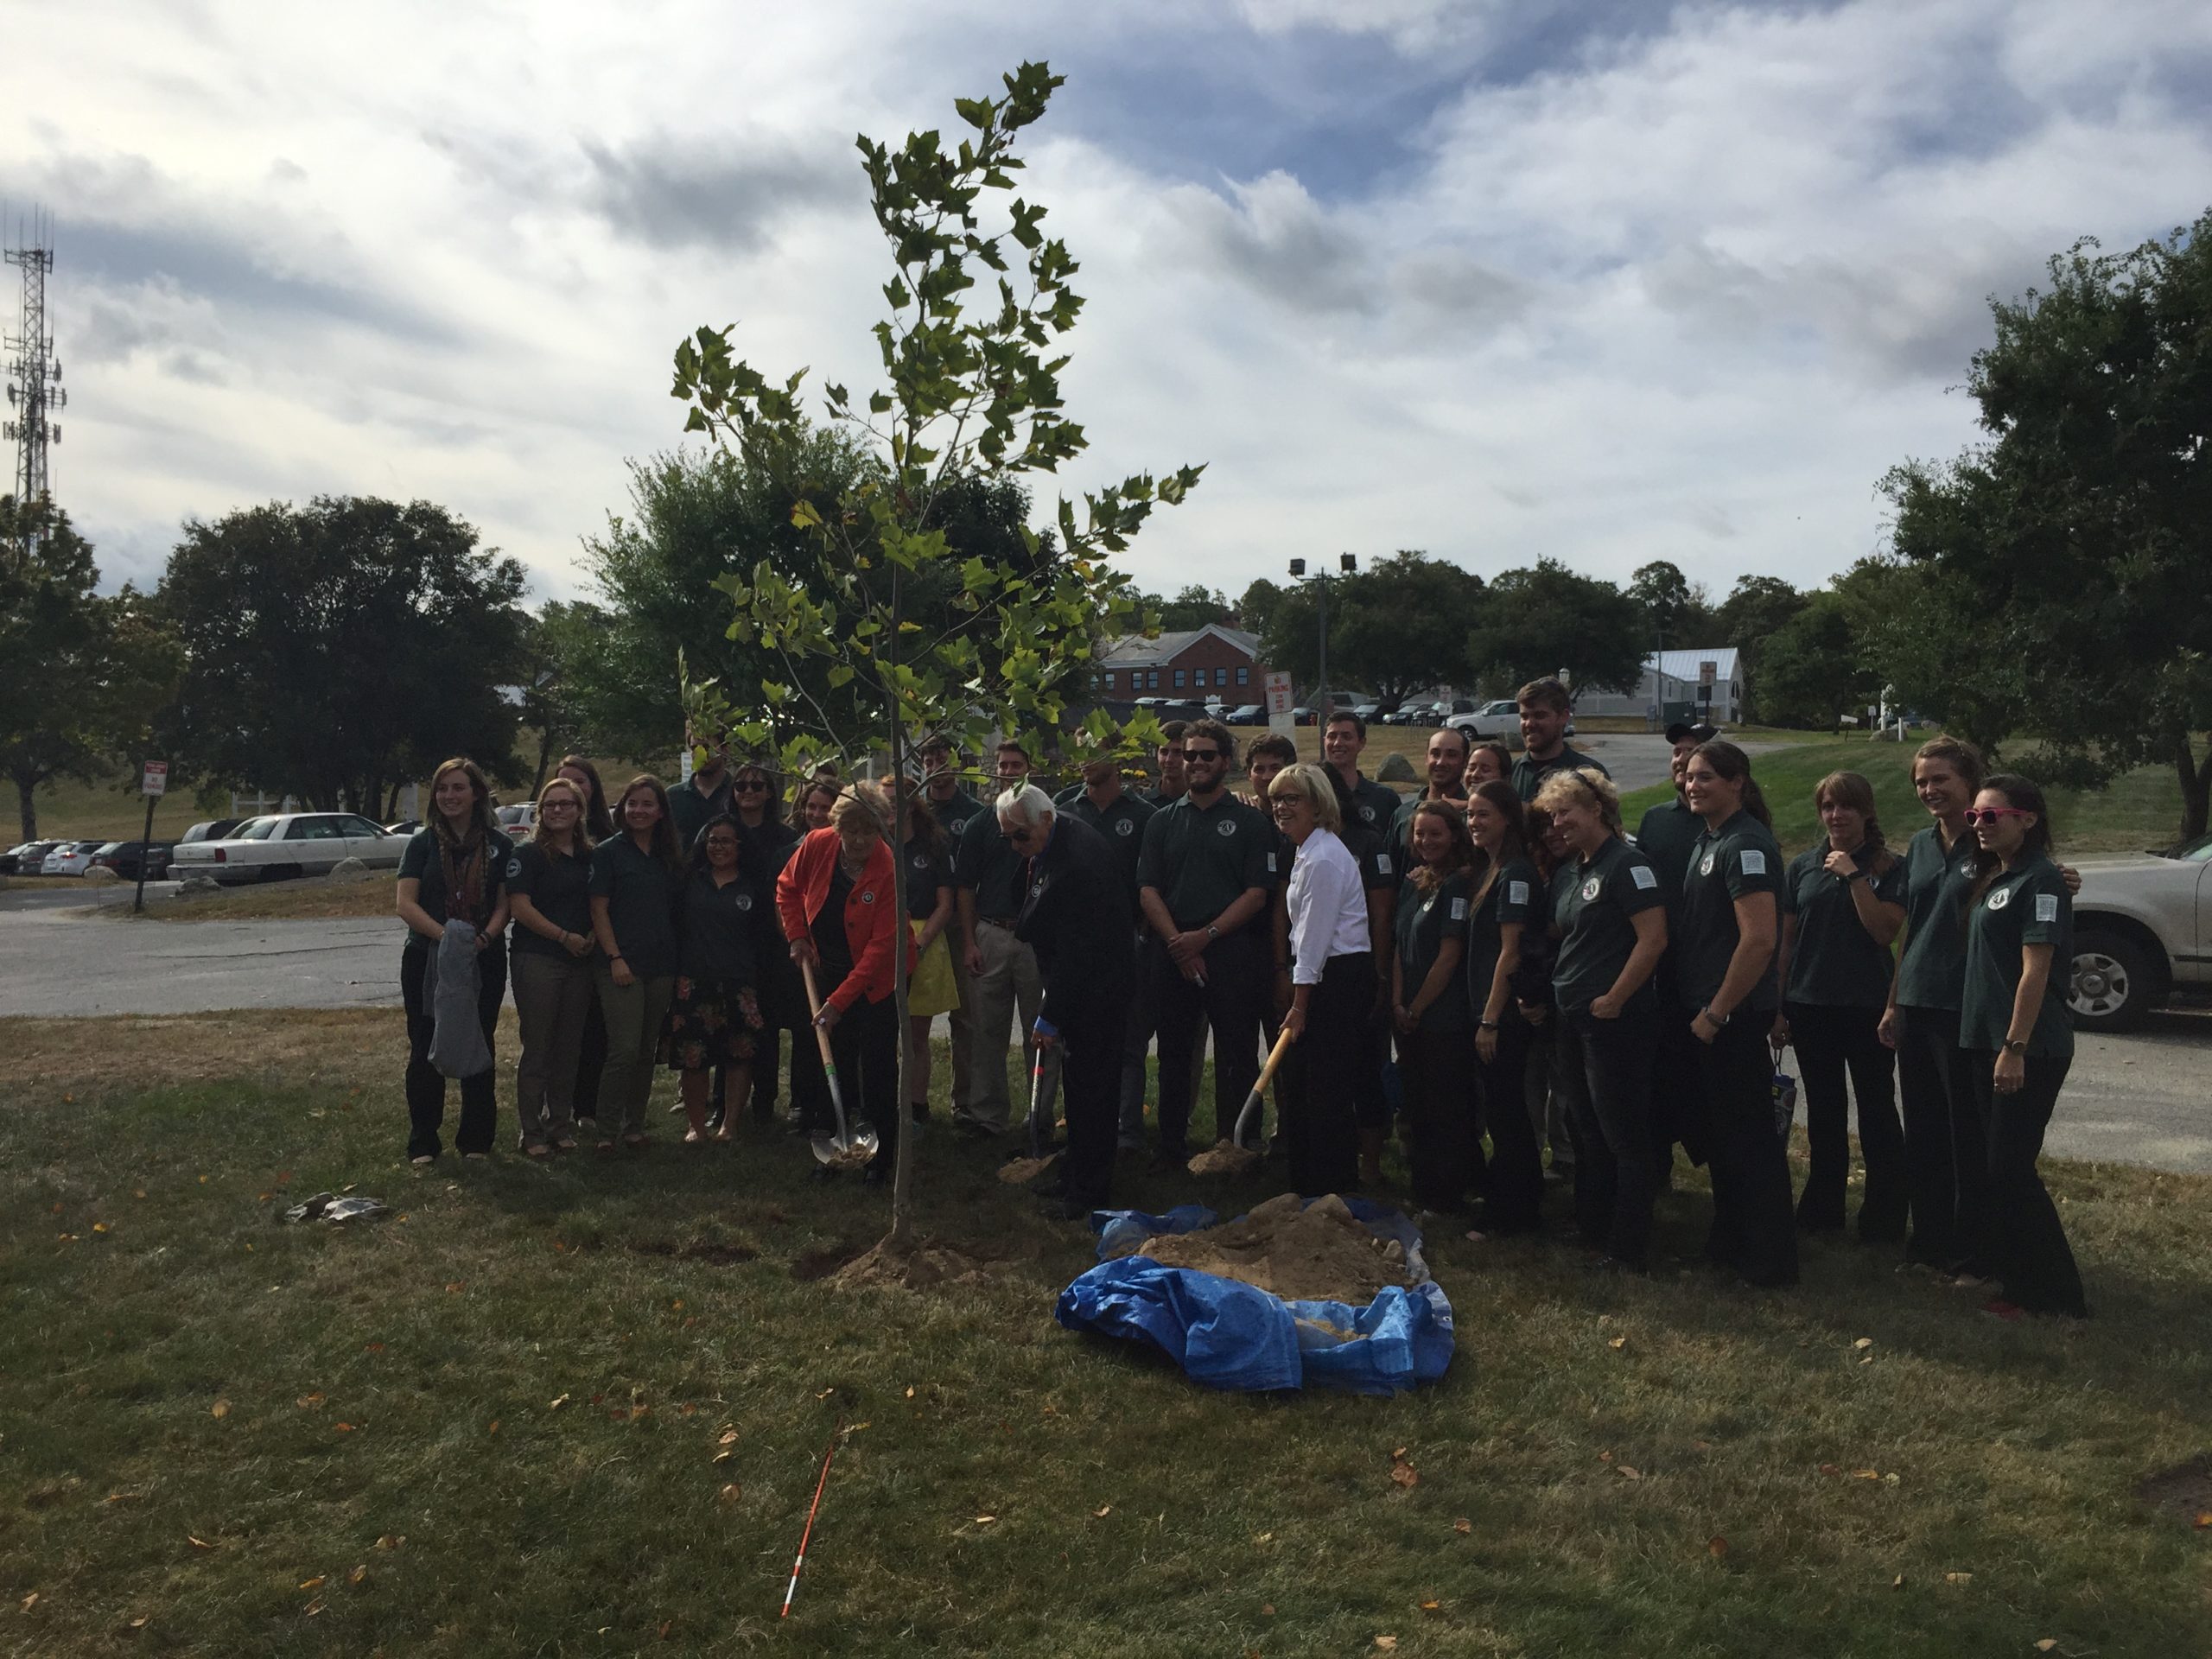 2014 Commissioners & AmeriCorps Year 16 Members Tree Planting